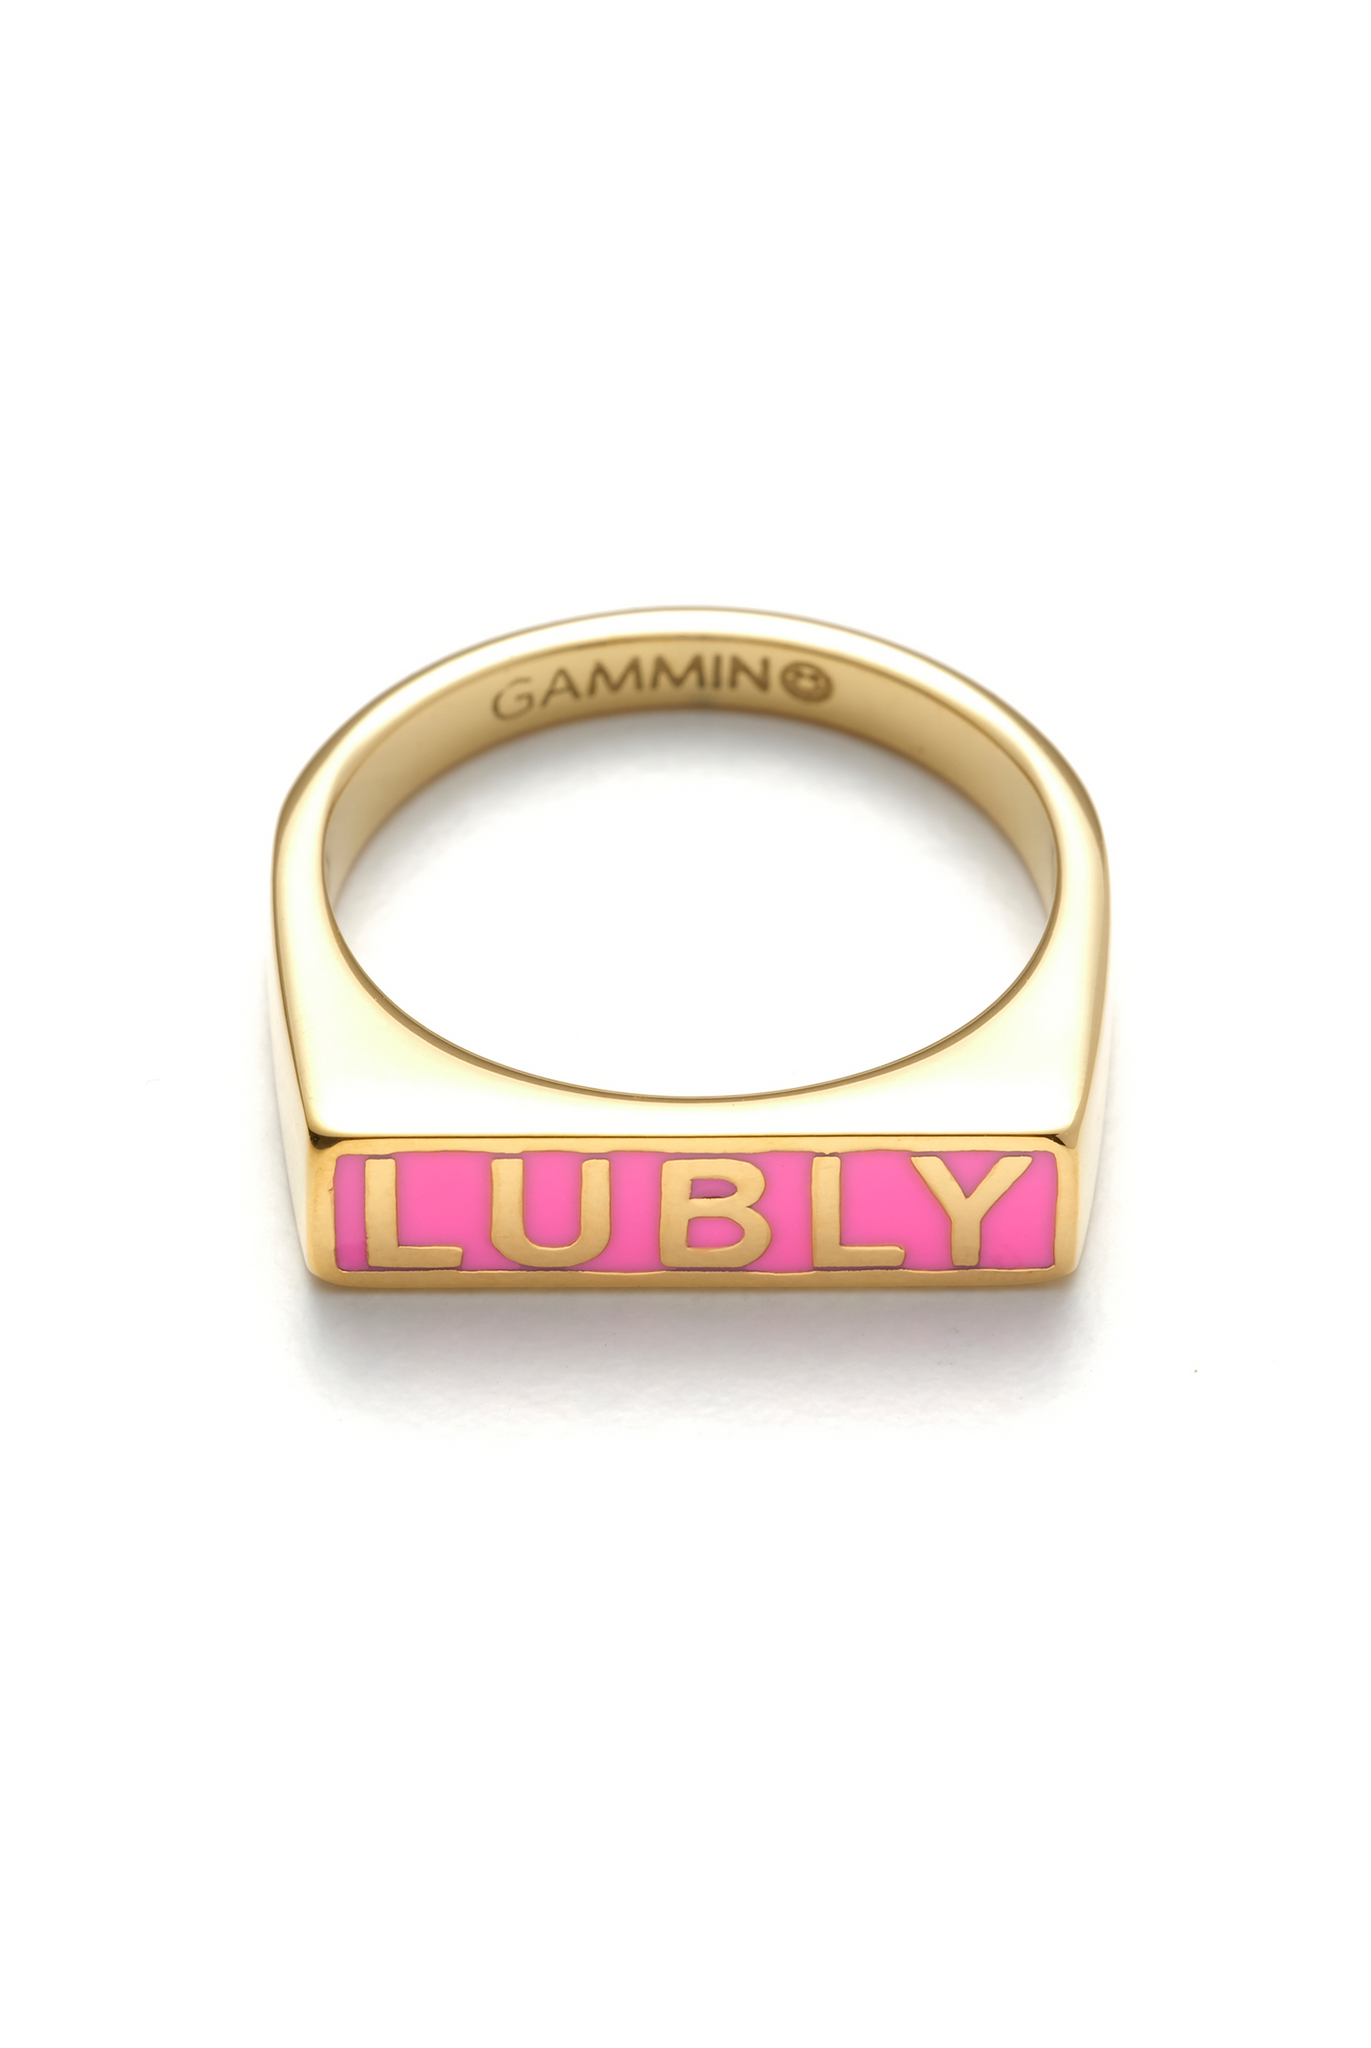 Lubly stacker ring